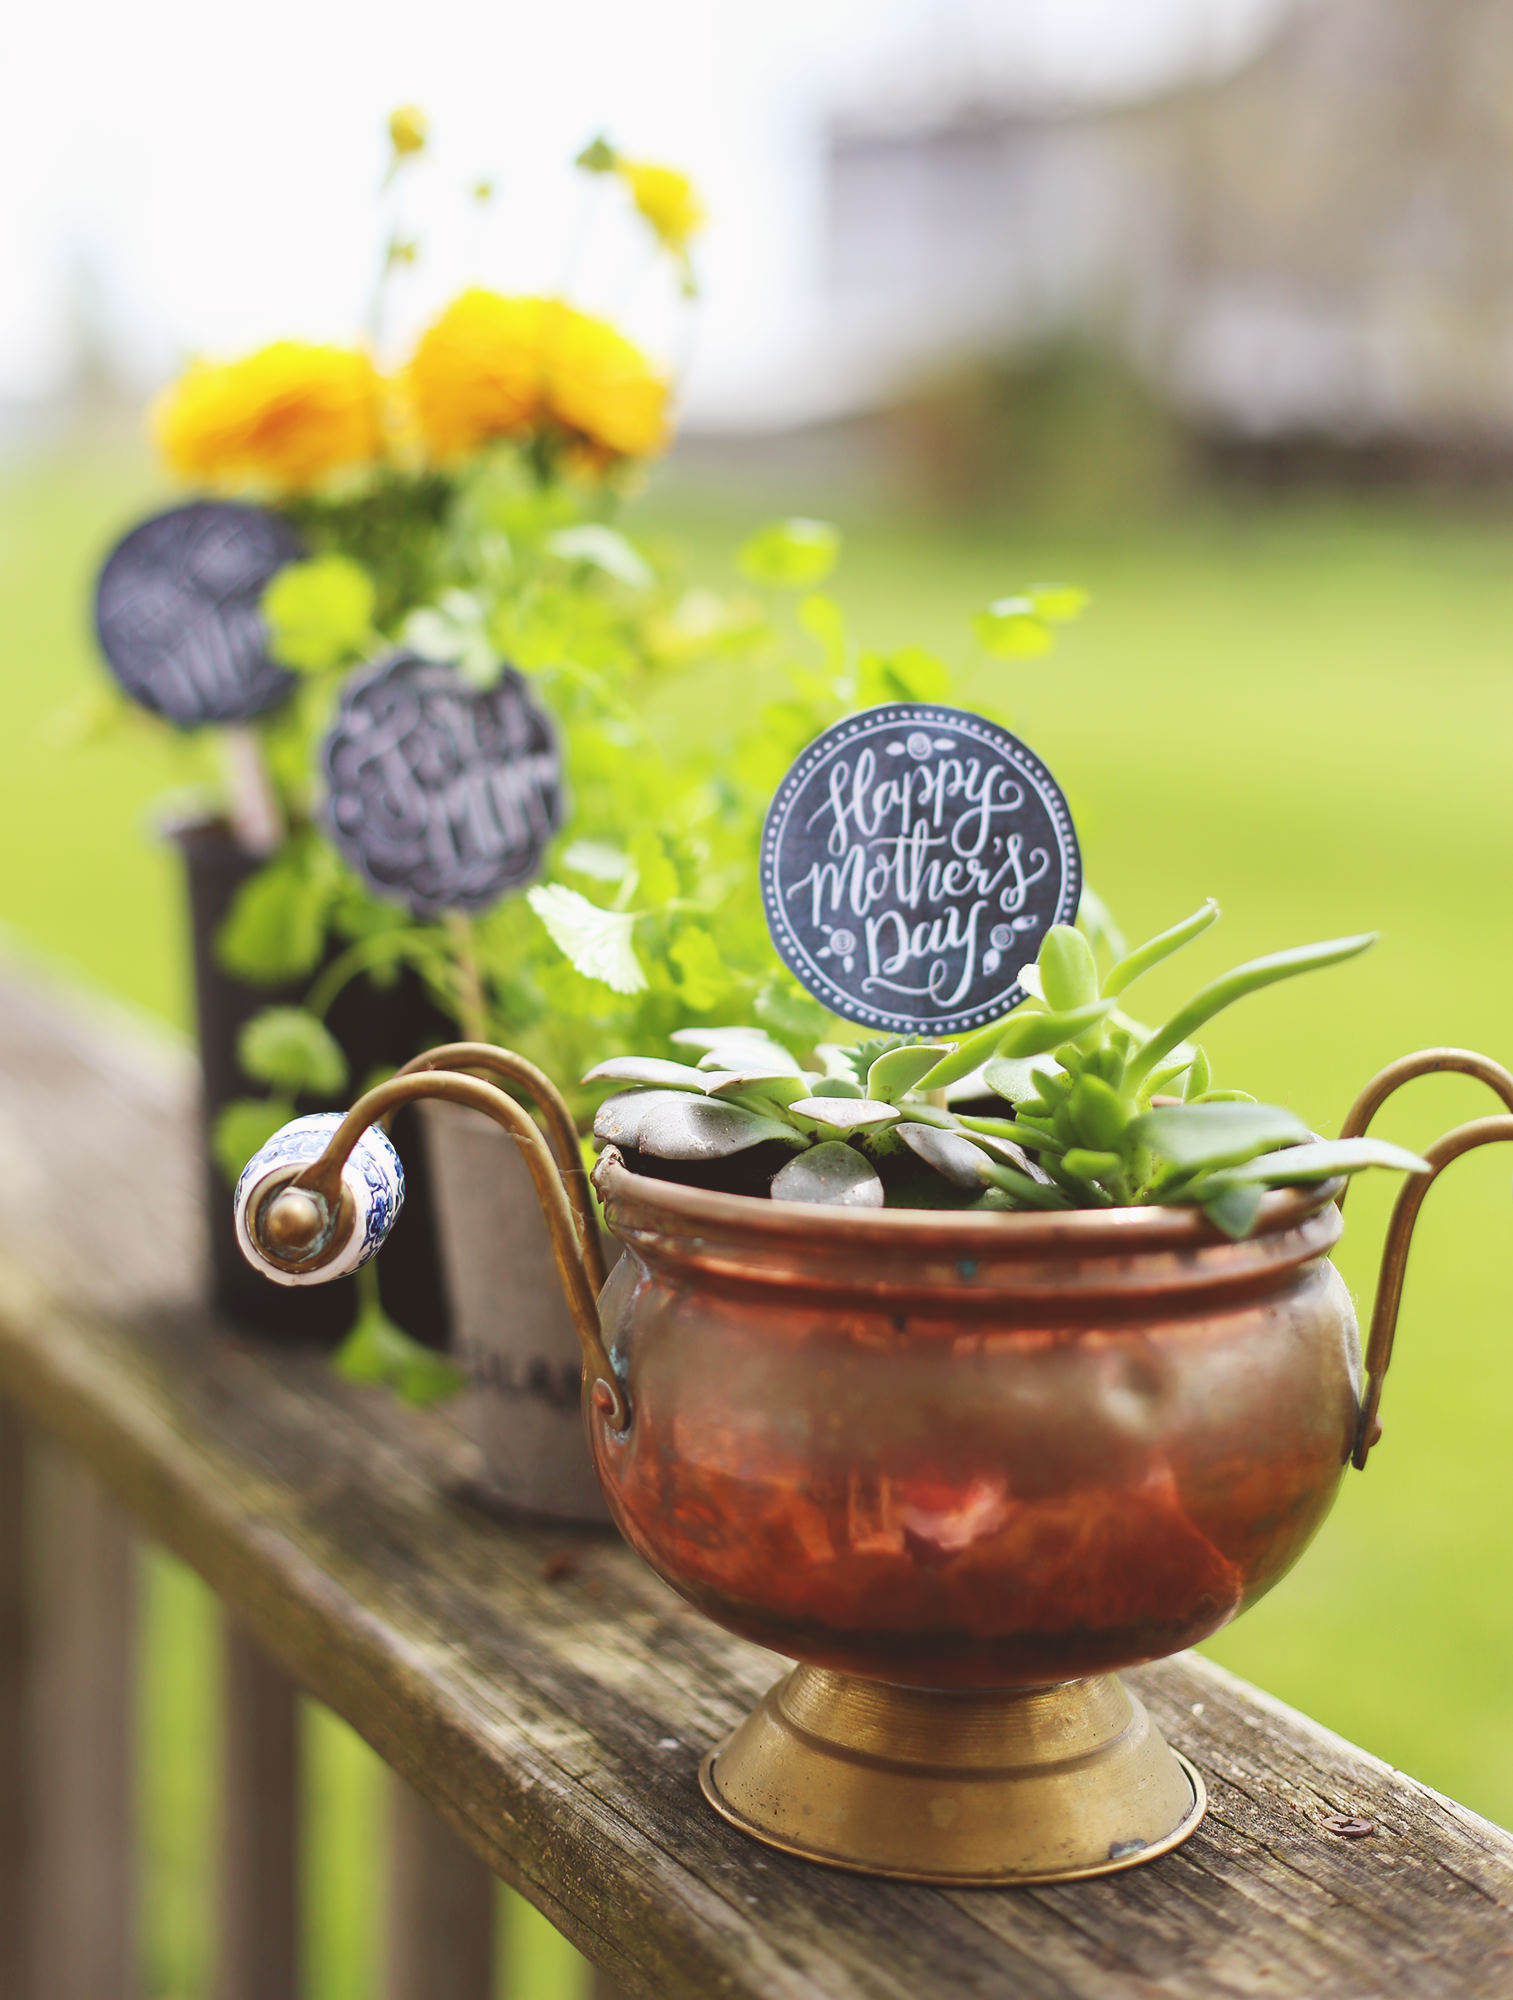 No need for wrapping or ribbons, just download our free, chalkboard Mother's Day gift tags and your plants will be gift-ready!